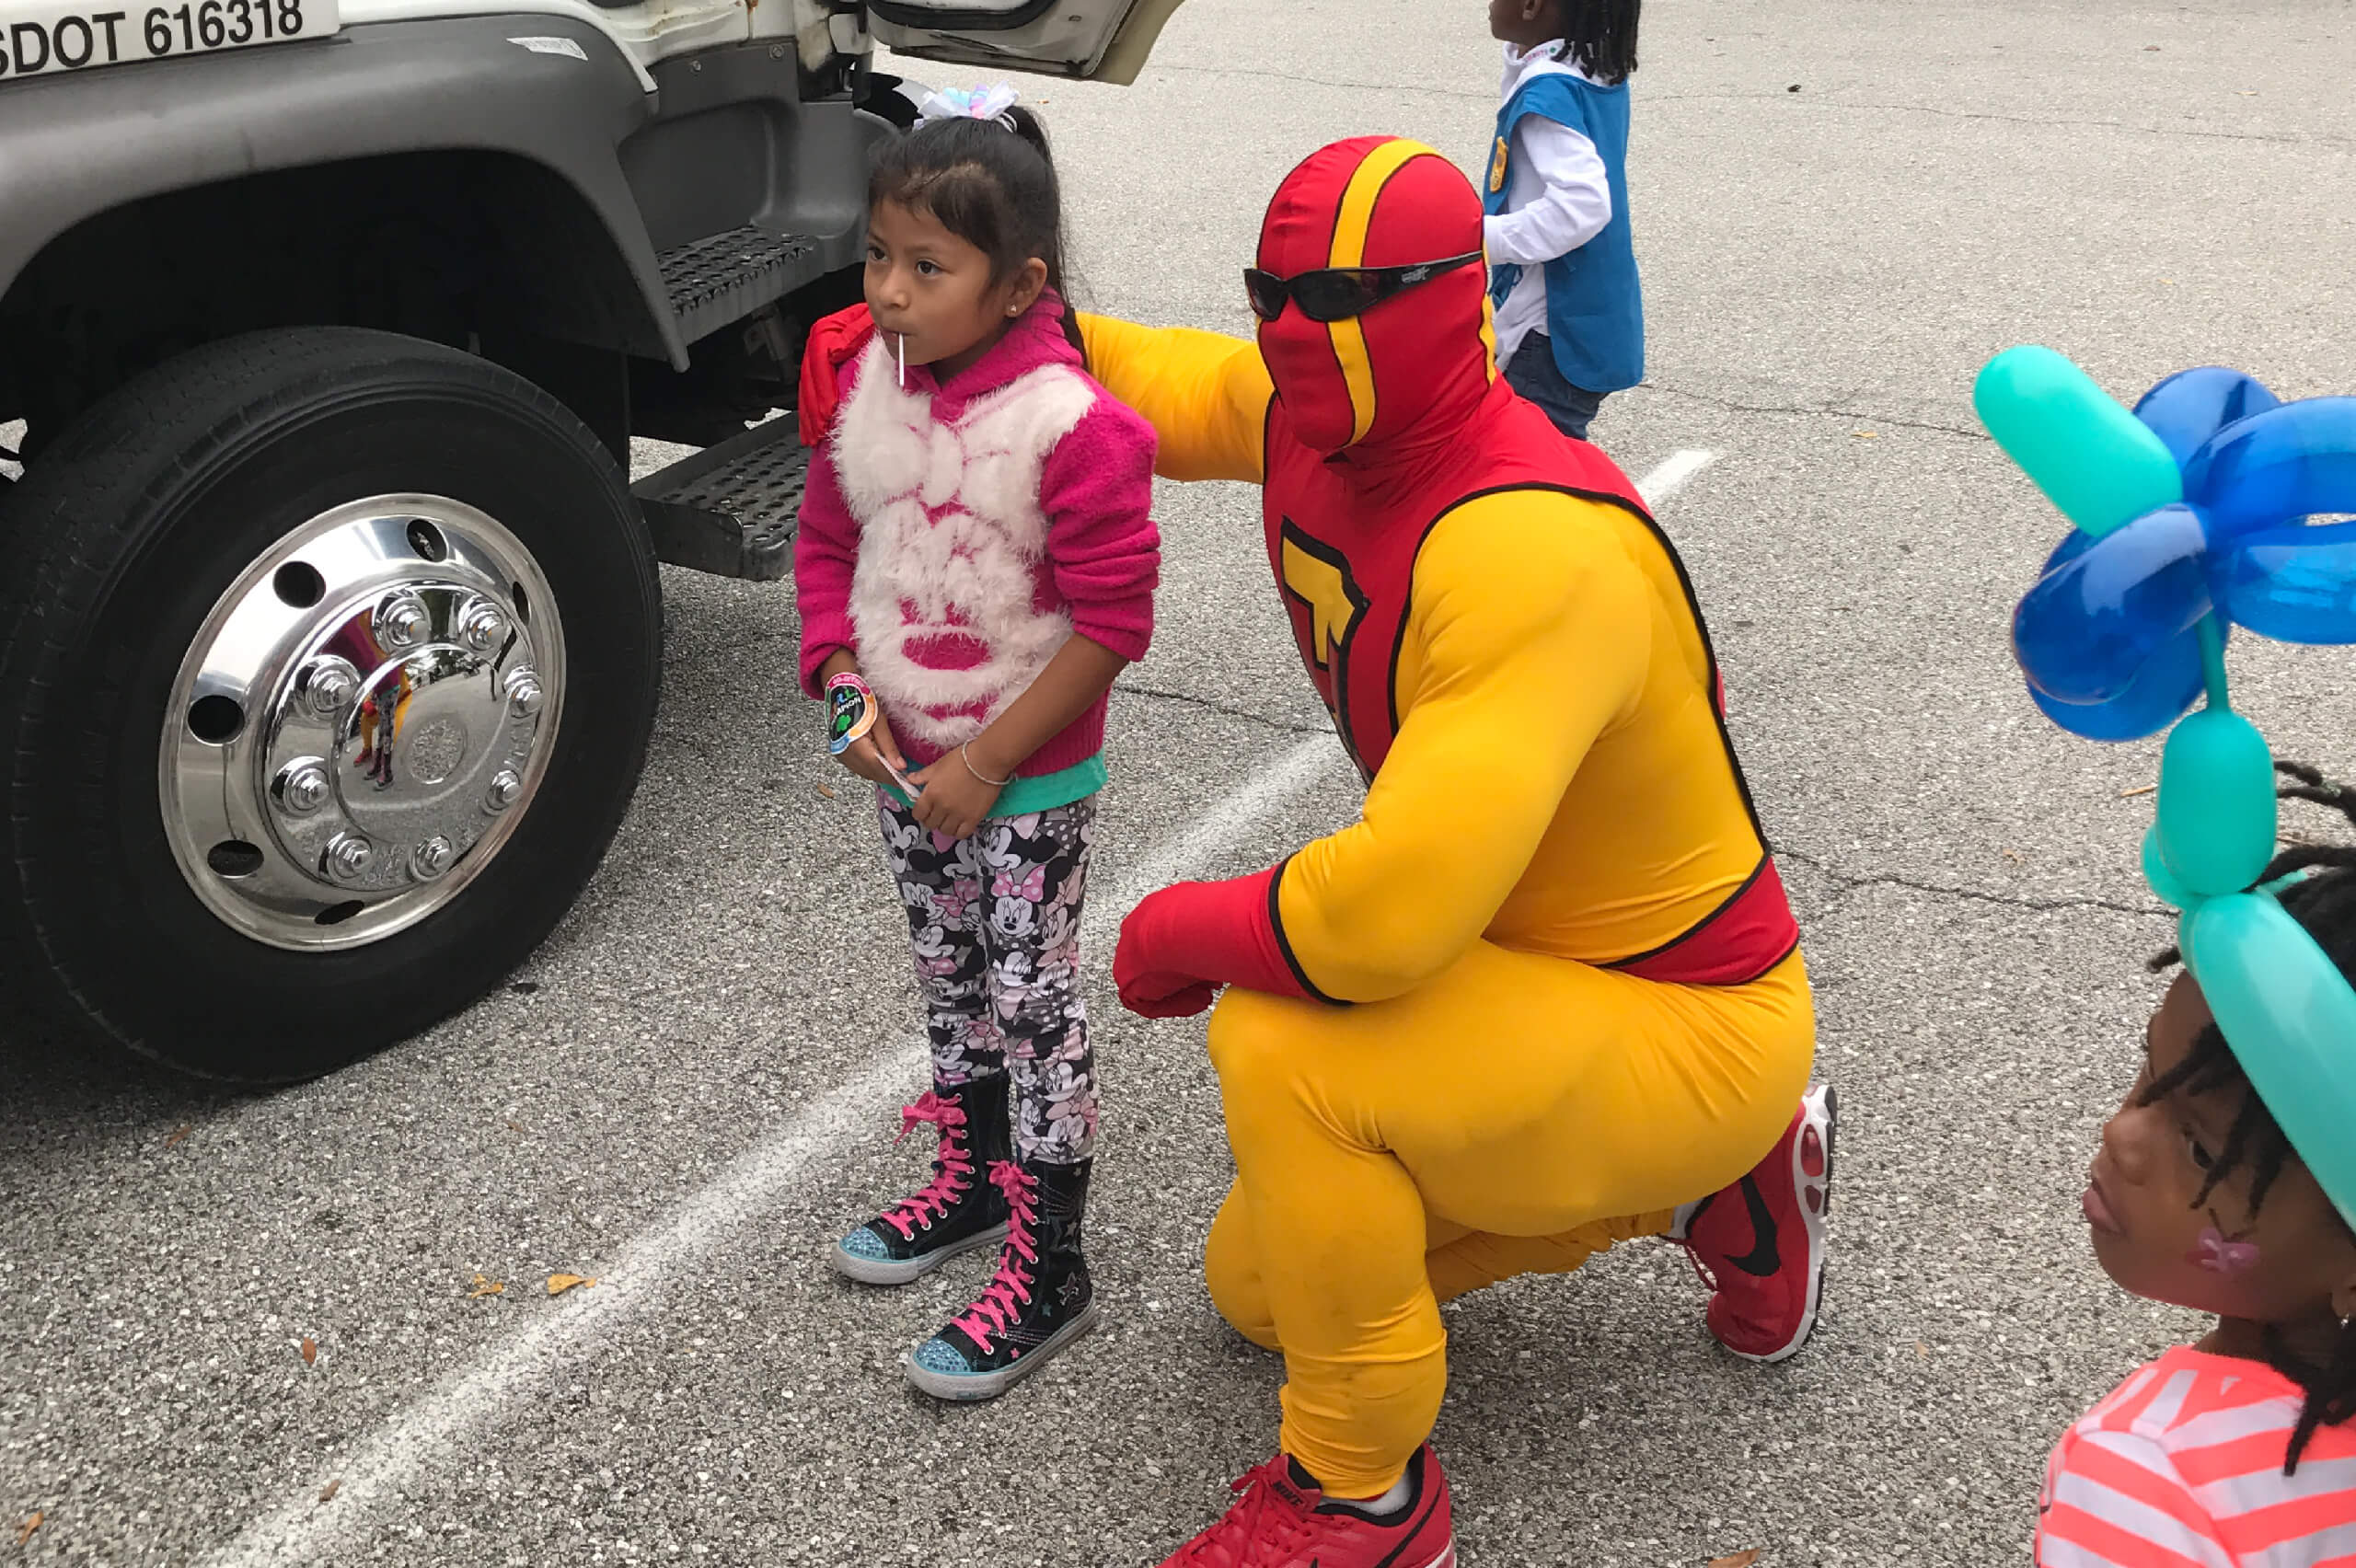 TurboMan poses with a young Odenton, Maryland resident during bulk trash hauling event.